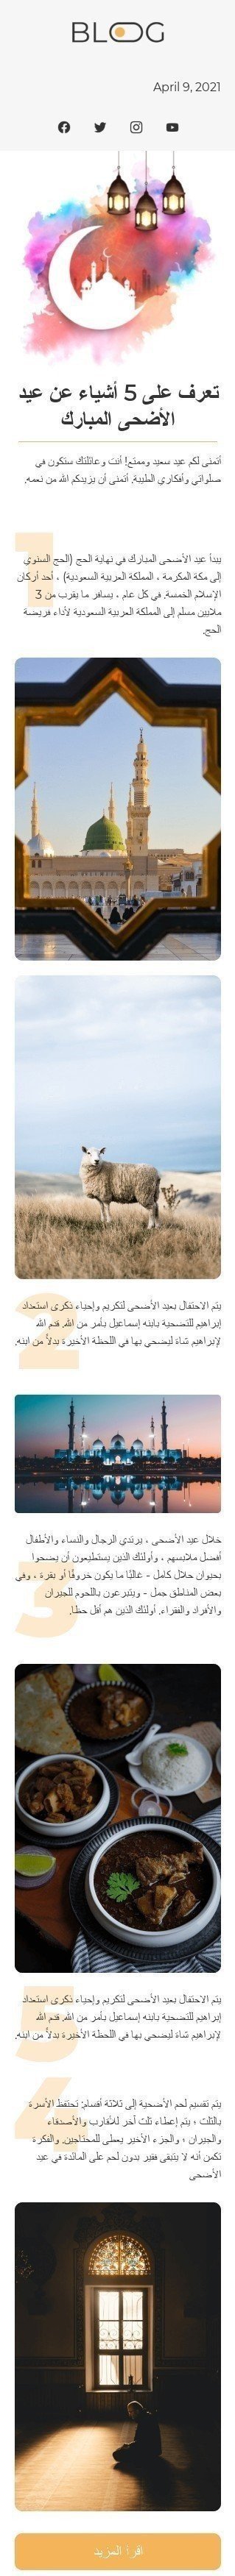 Kurban Bayrami Email Template «5 facts» for Publications & Blogging industry mobile view